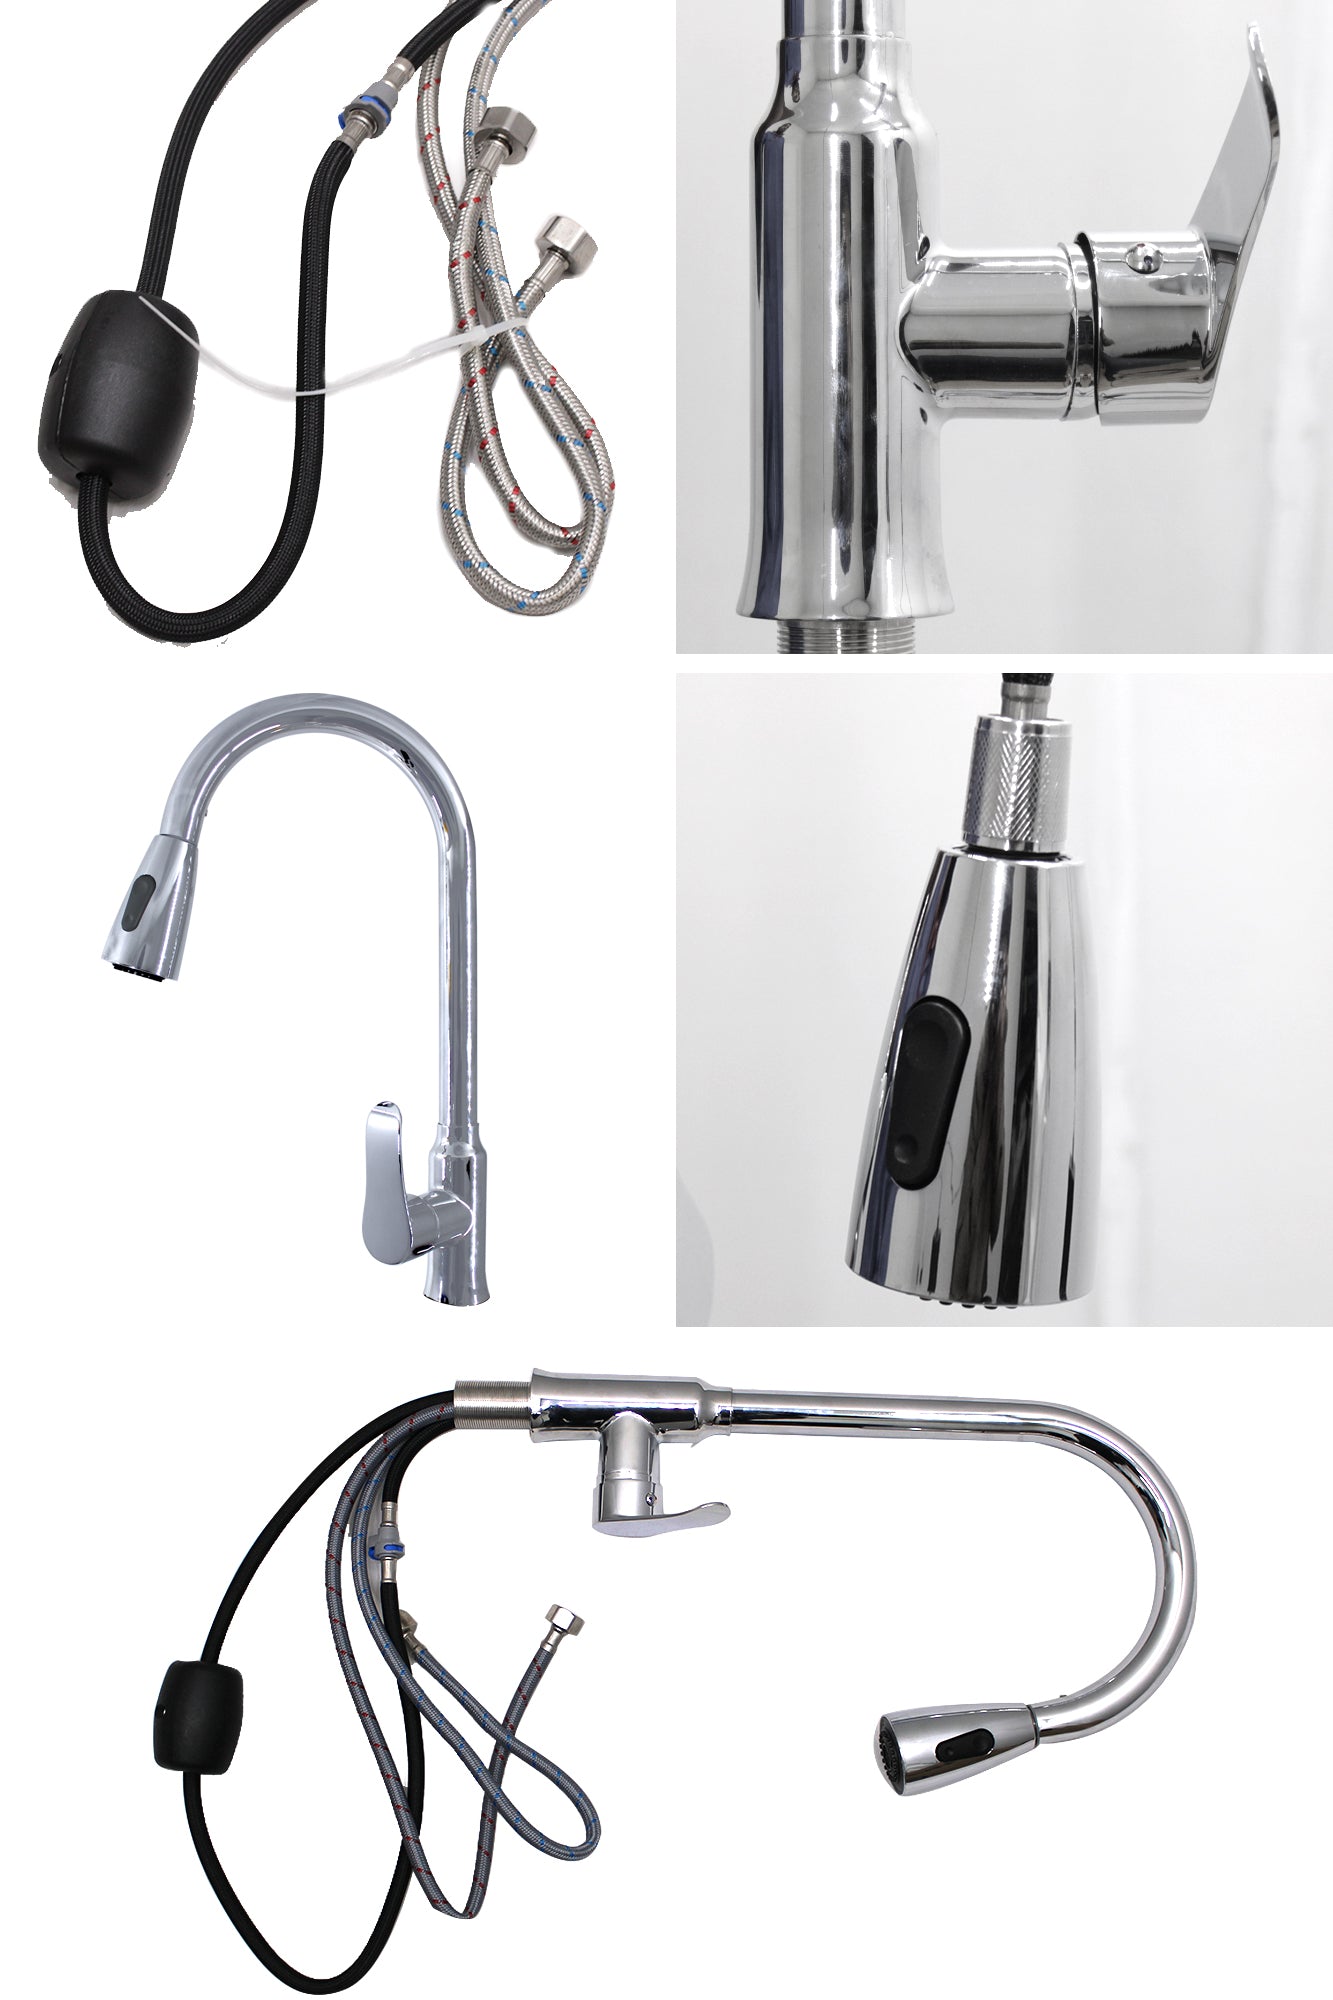 LMA Heavy Duty Kitchen Tap Mixer with Self-Retracting Pullout Faucet  BA-6809